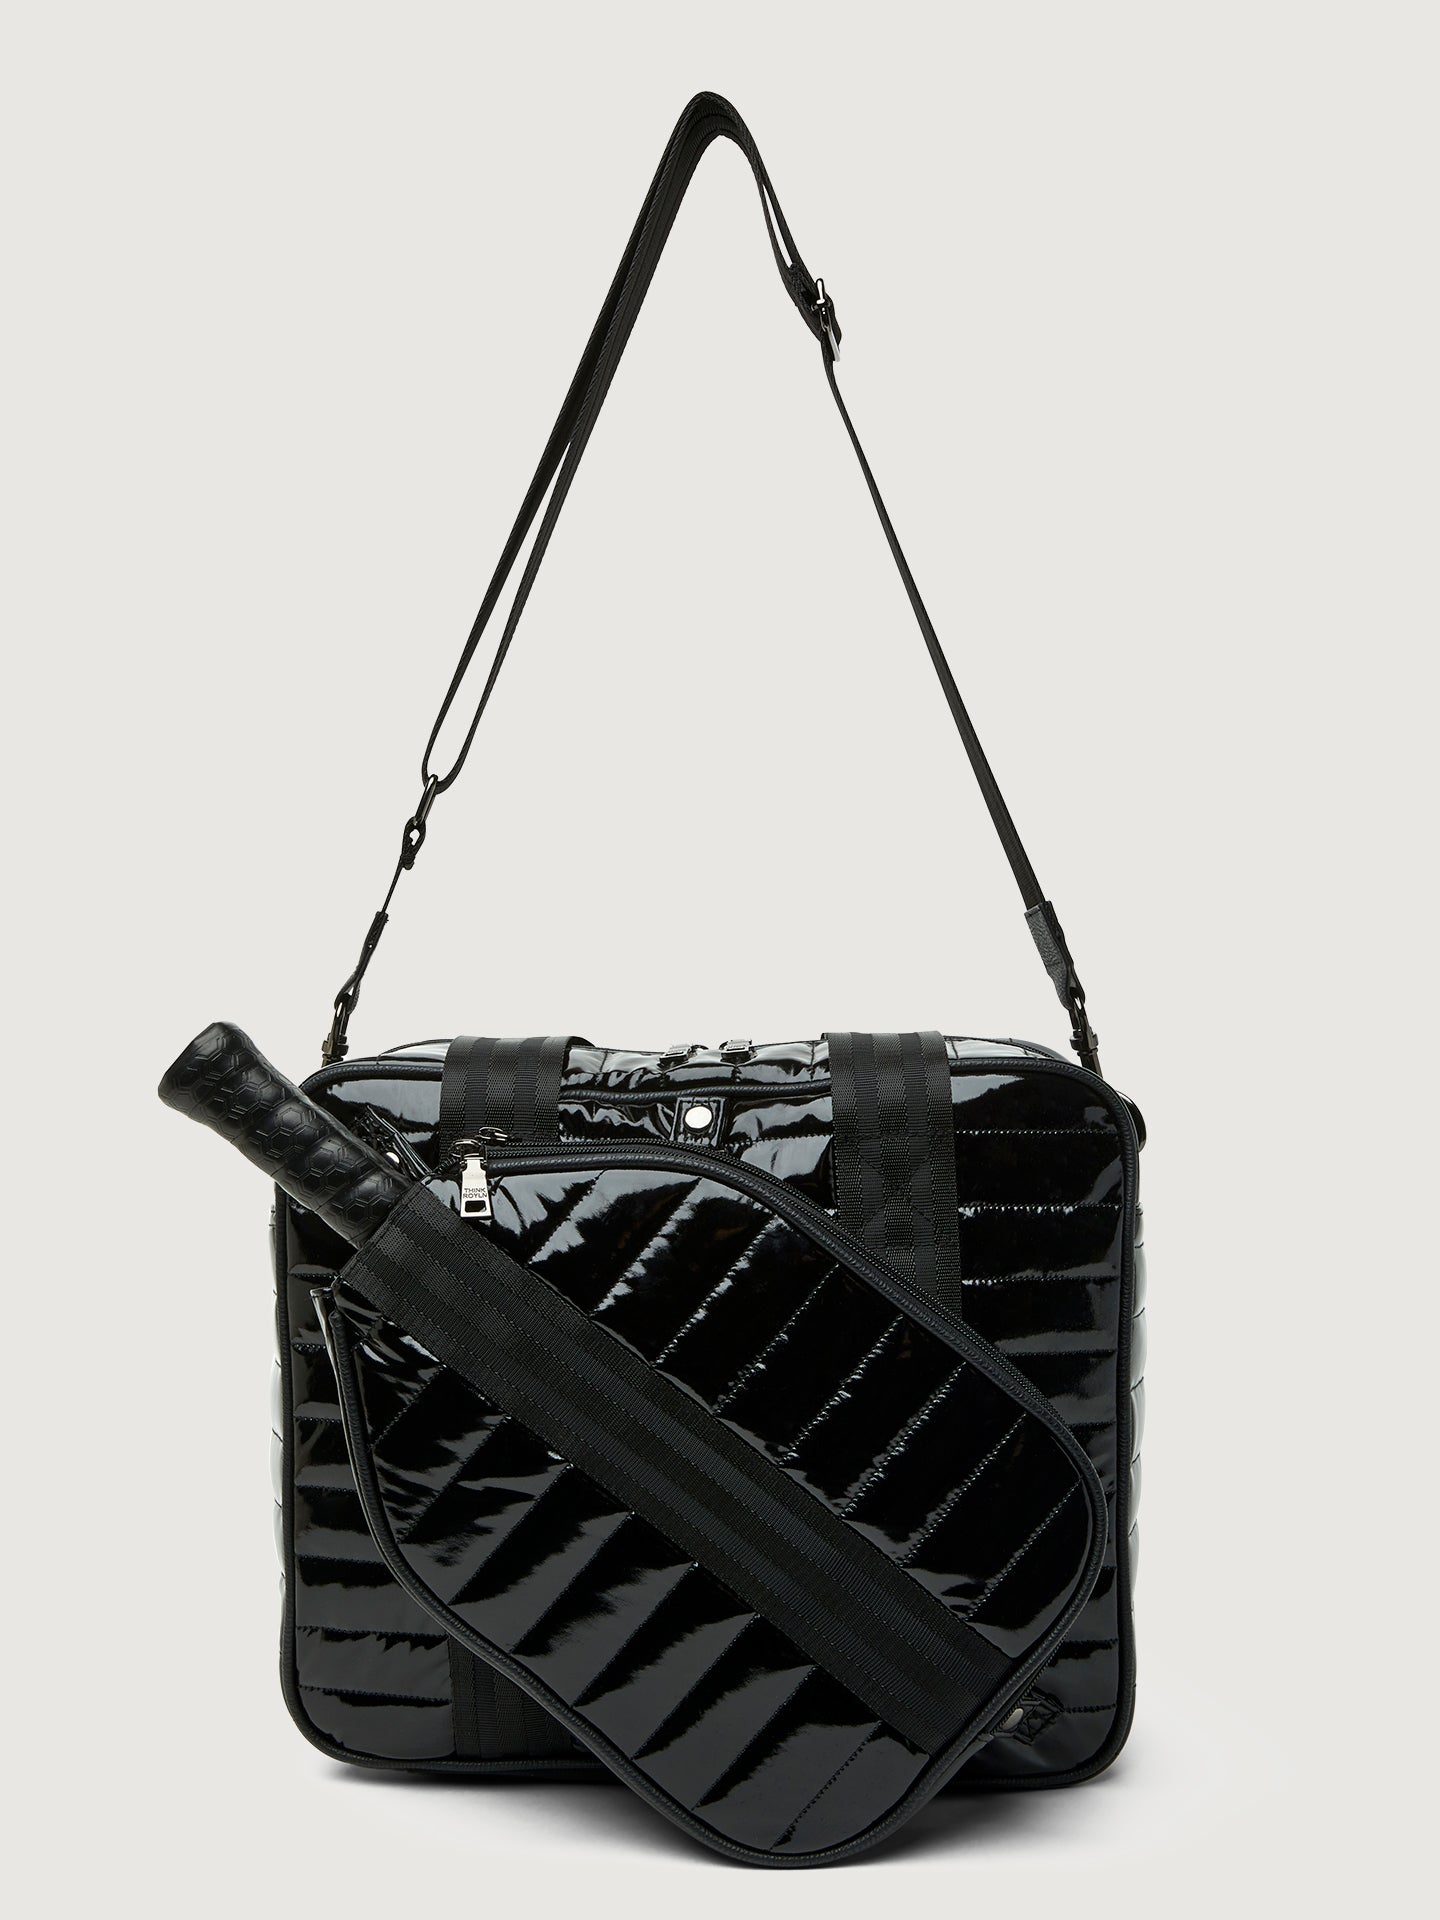 Think Royln Sporty Spice Pickle Ball Bag in Black